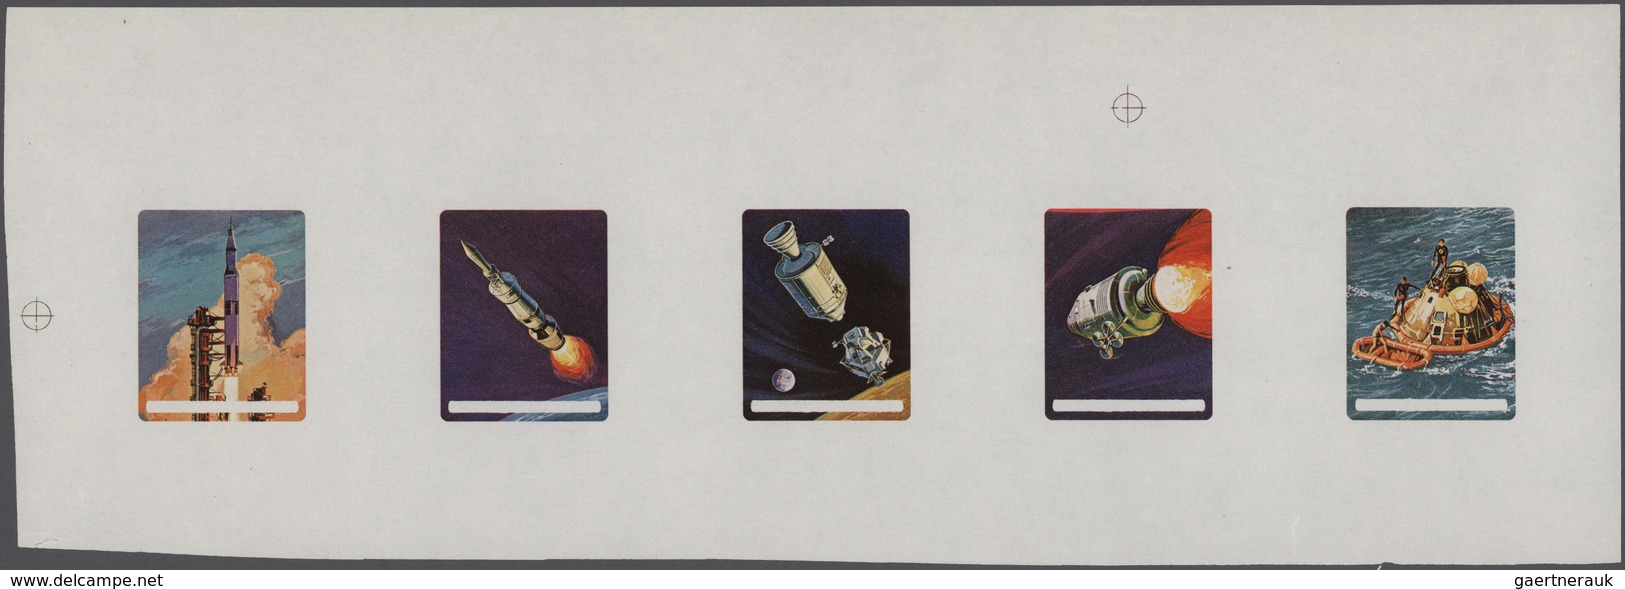 Burundi: 1969, FIRST LANDING ON THE MOON - 8 Items; Collective, Progressive Single Die Proofs For So - Colecciones